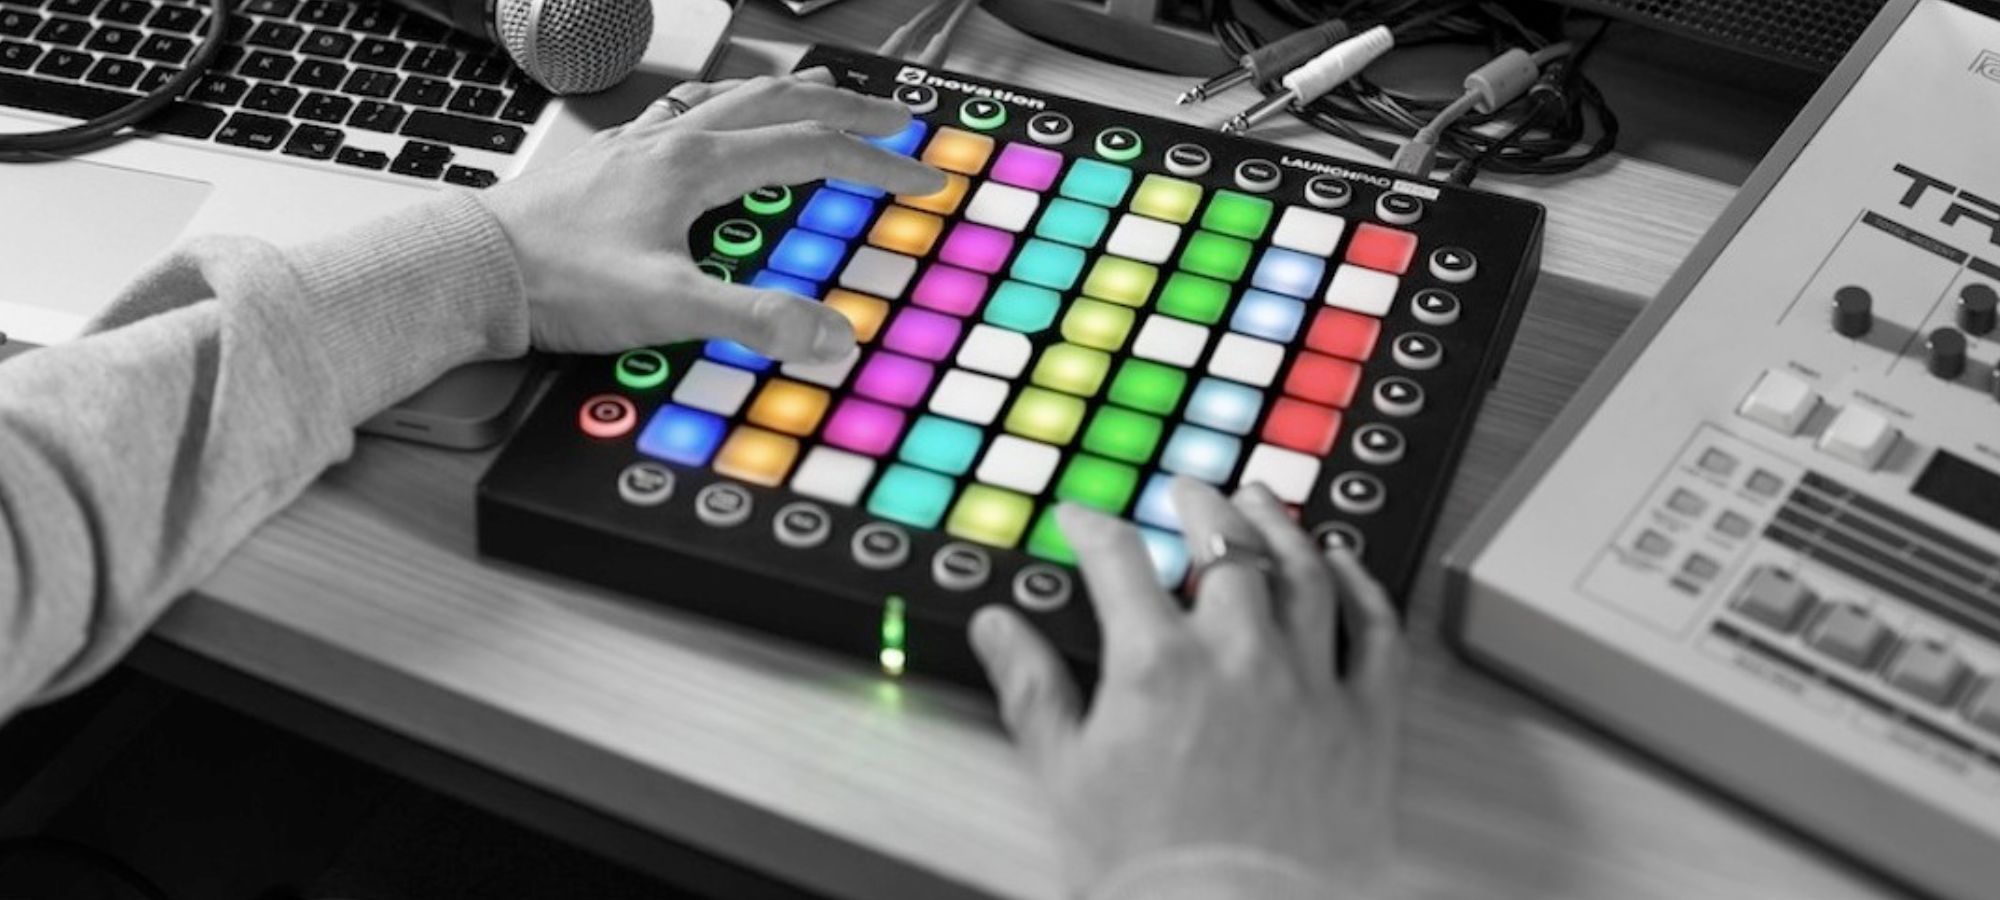 How To Make An Led Metronome On Launchpad